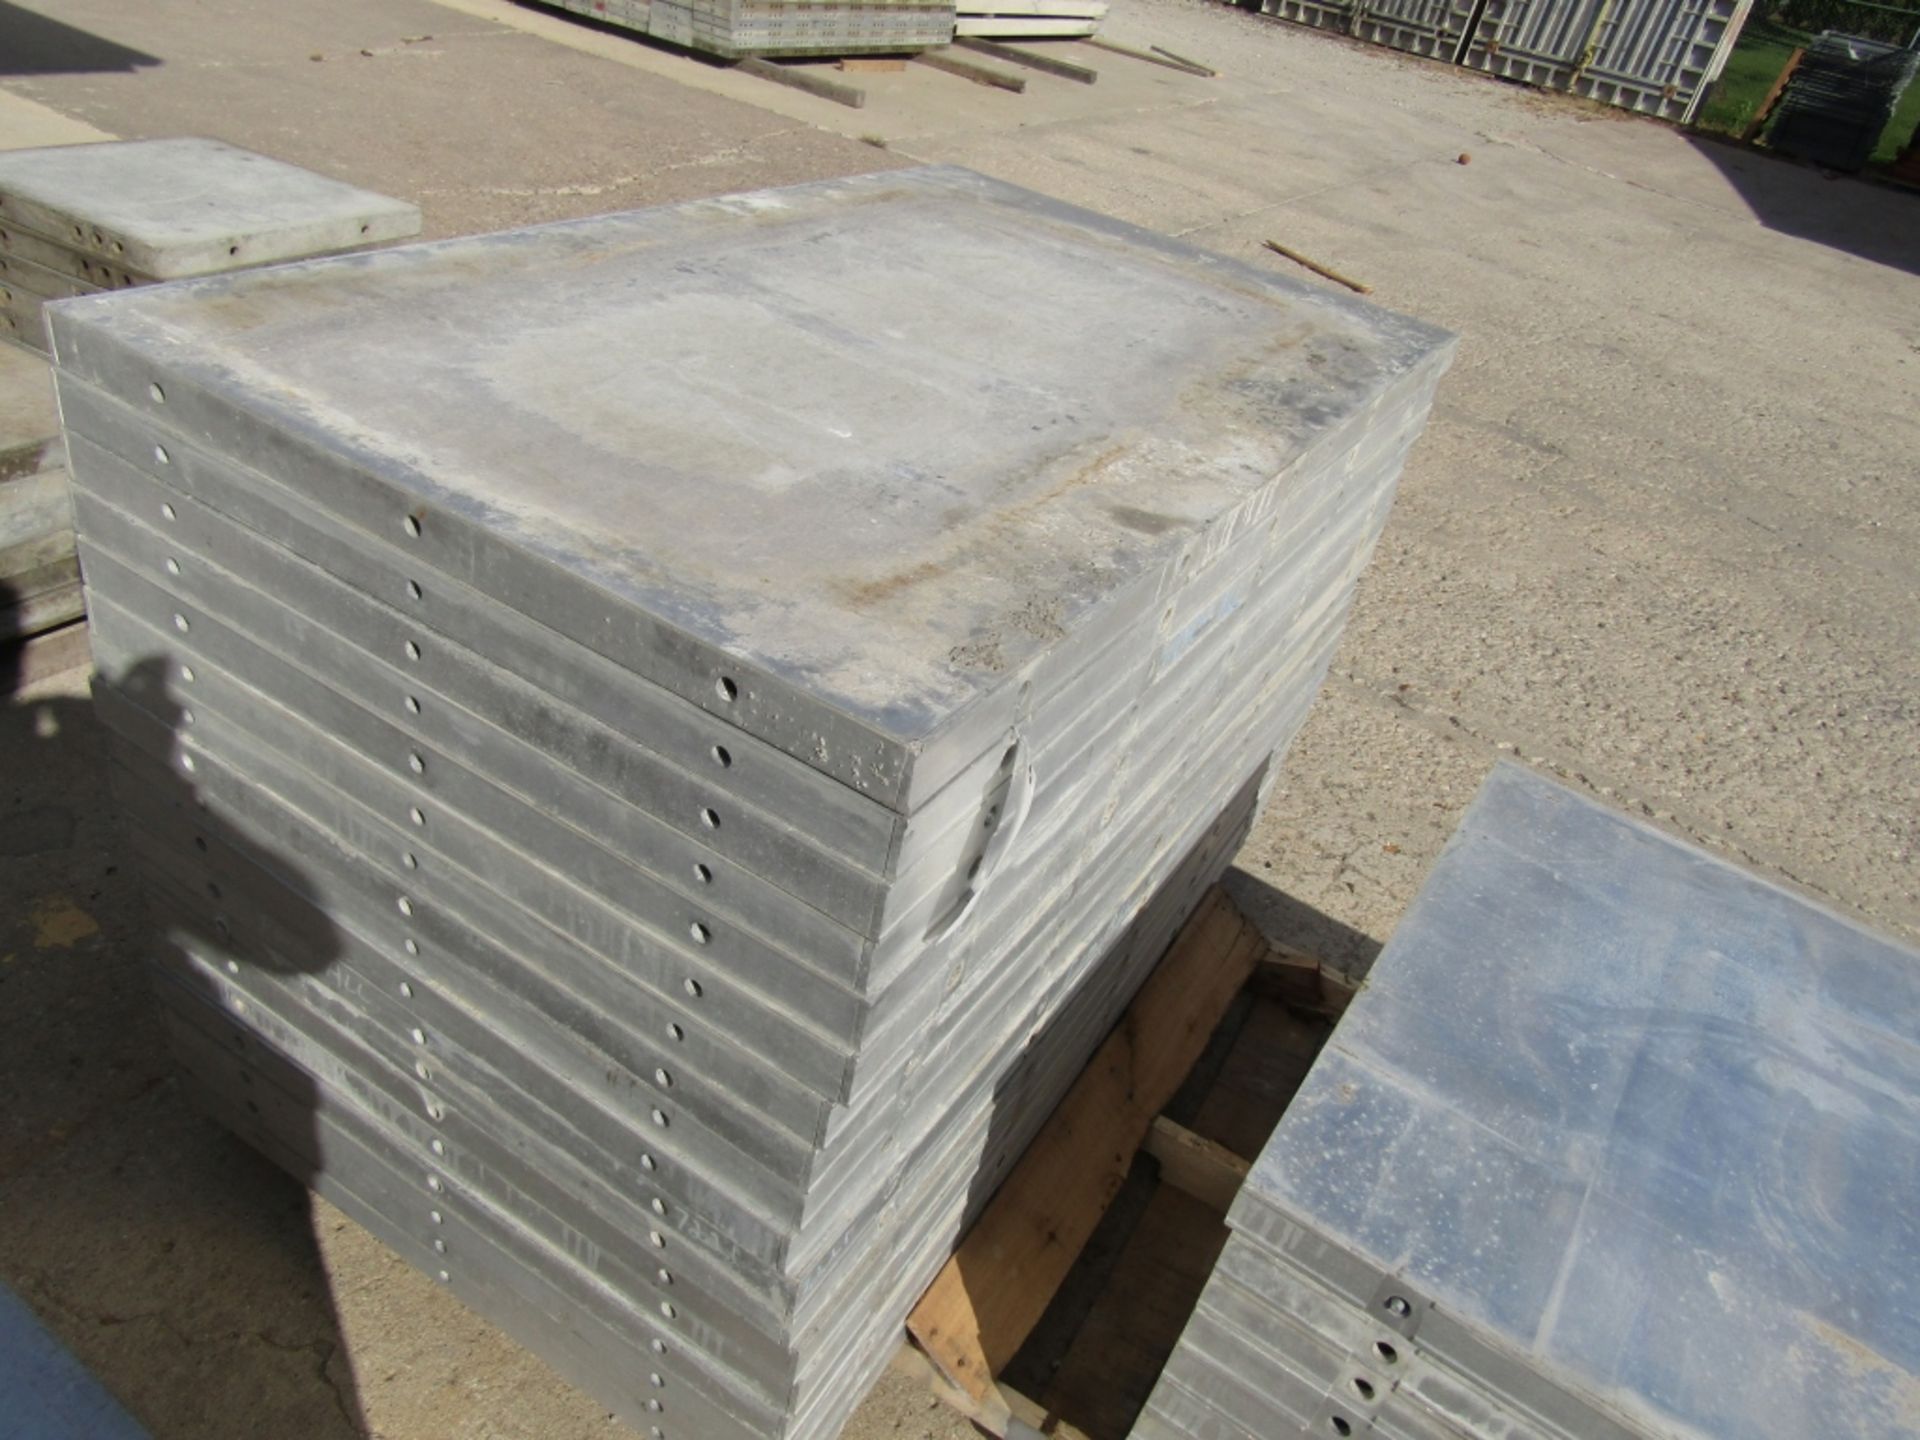 (15) 36" x 5' New Durand Concrete Forms, Smooth 6-12 Hole Pattern, Attached Hardware, Located in Mt. - Image 2 of 4